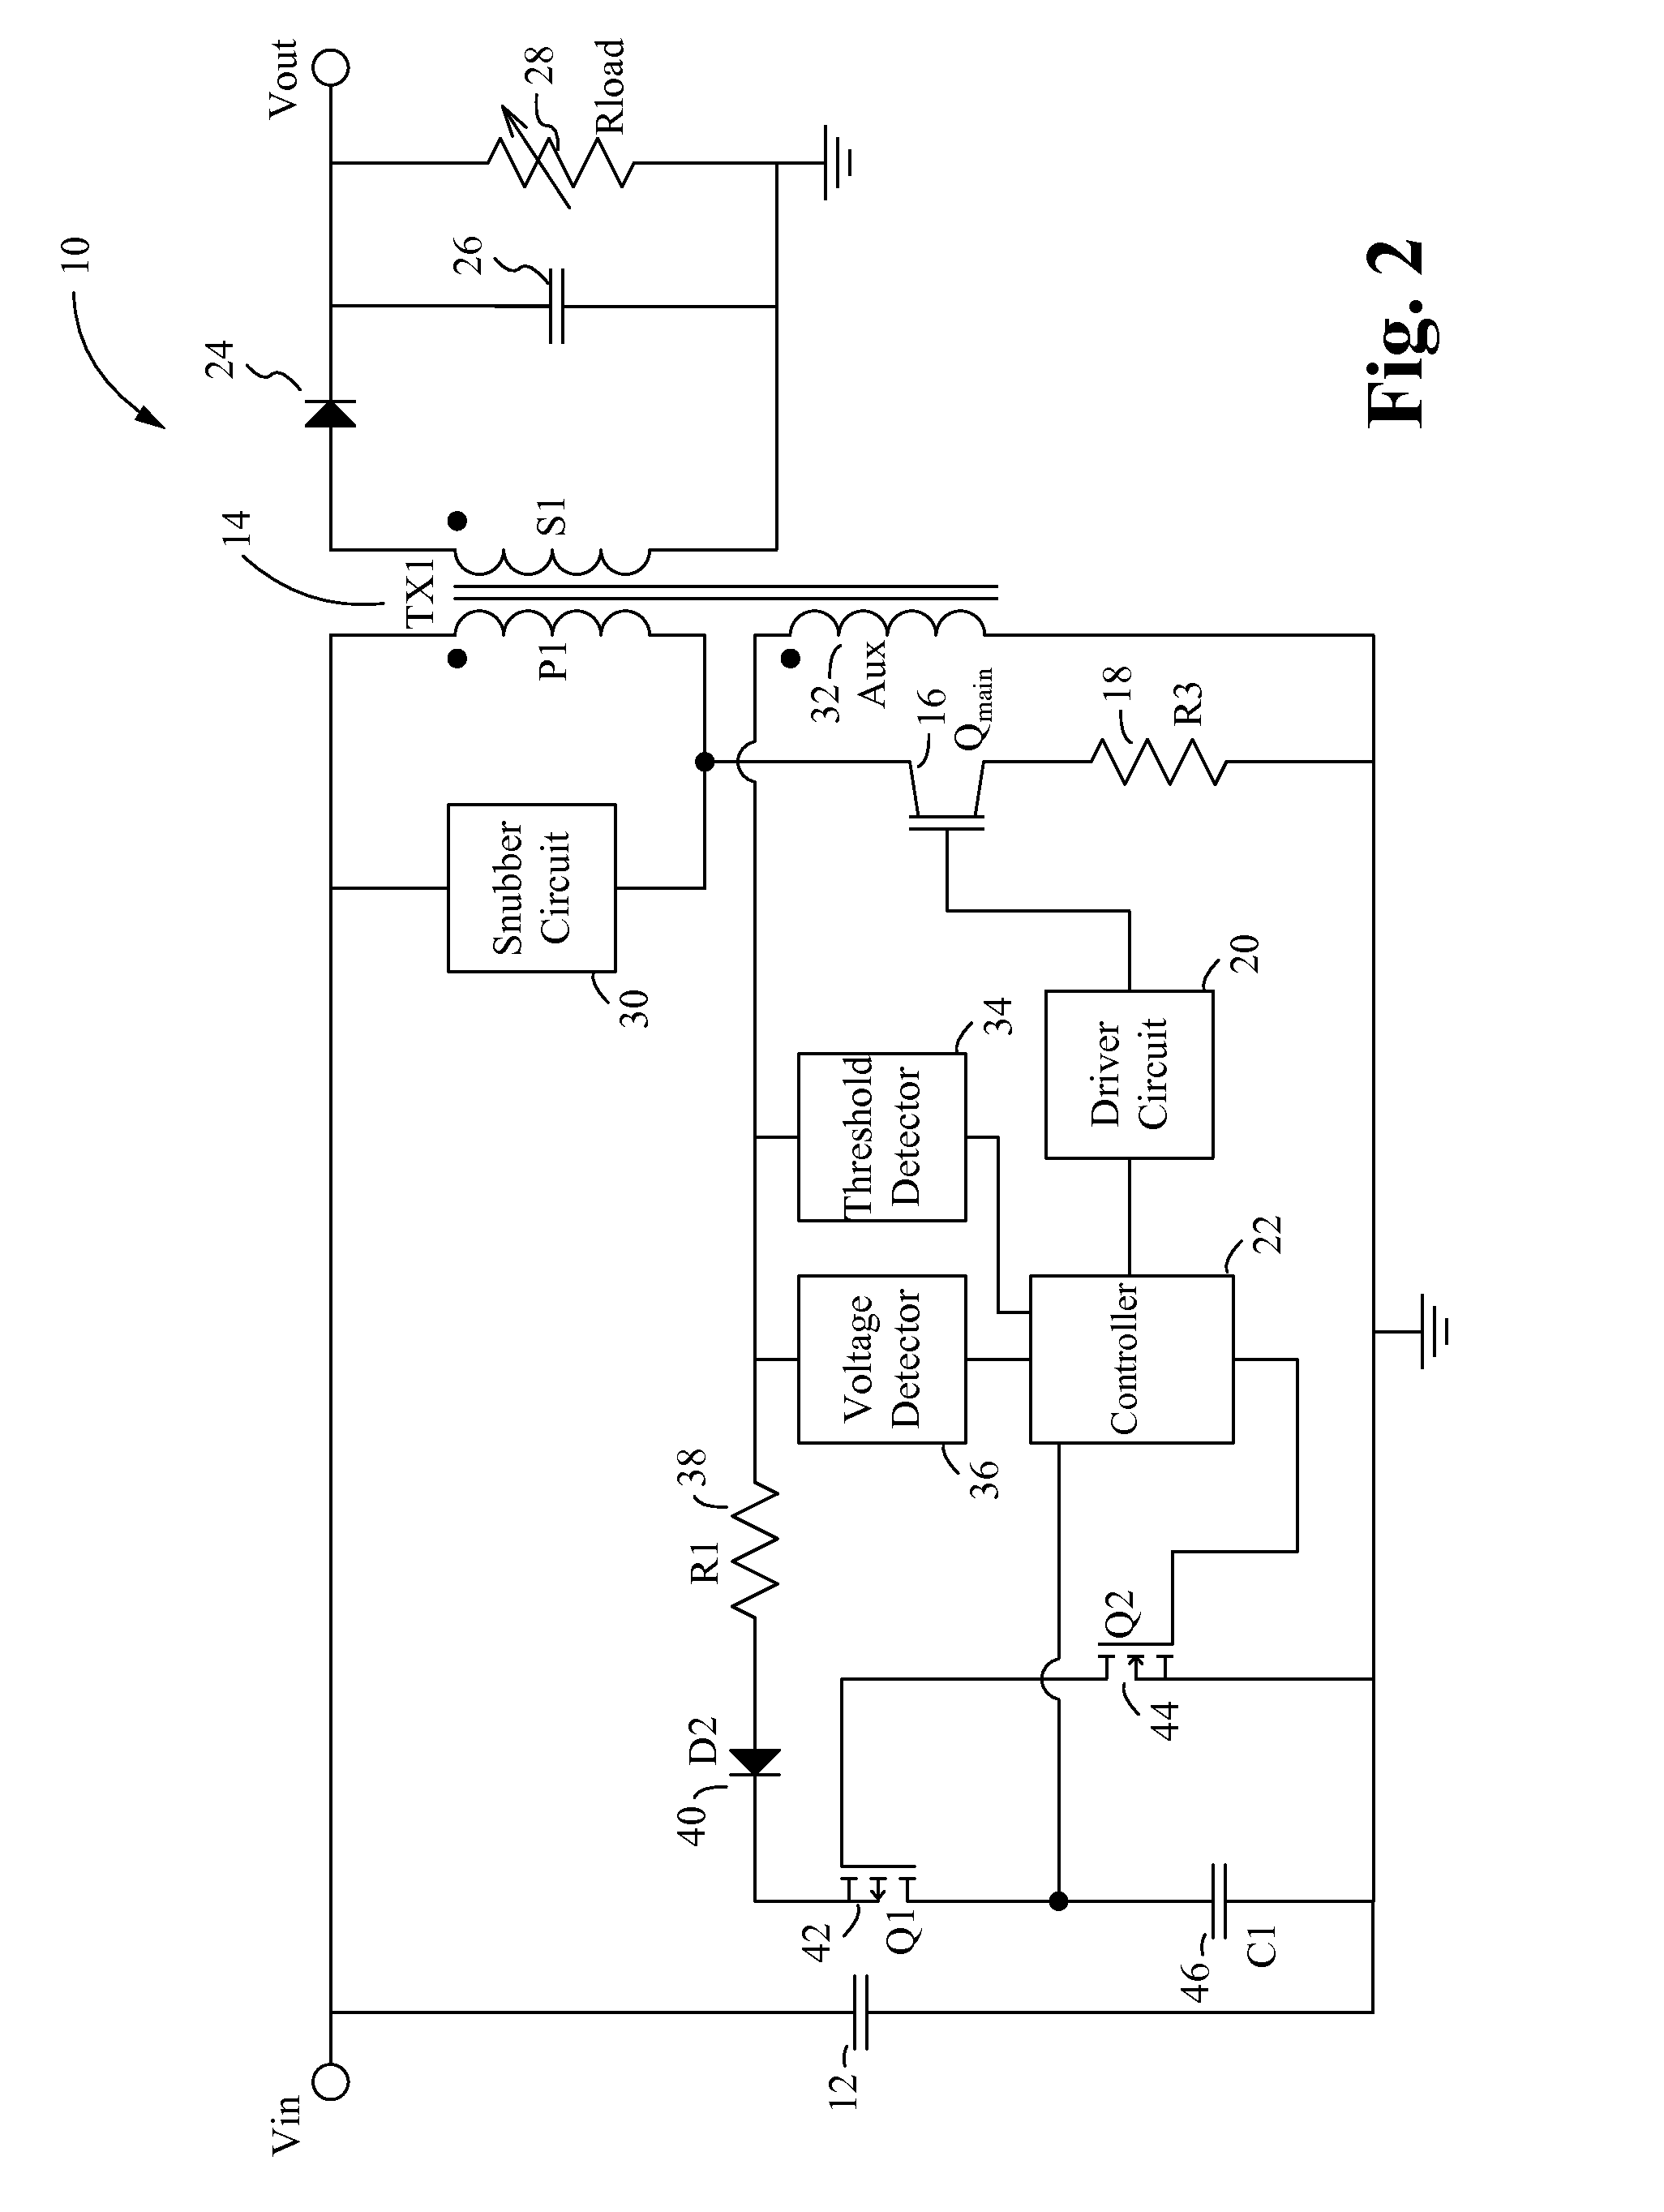 Method to control a minimum pulsewidth in a switch mode power supply